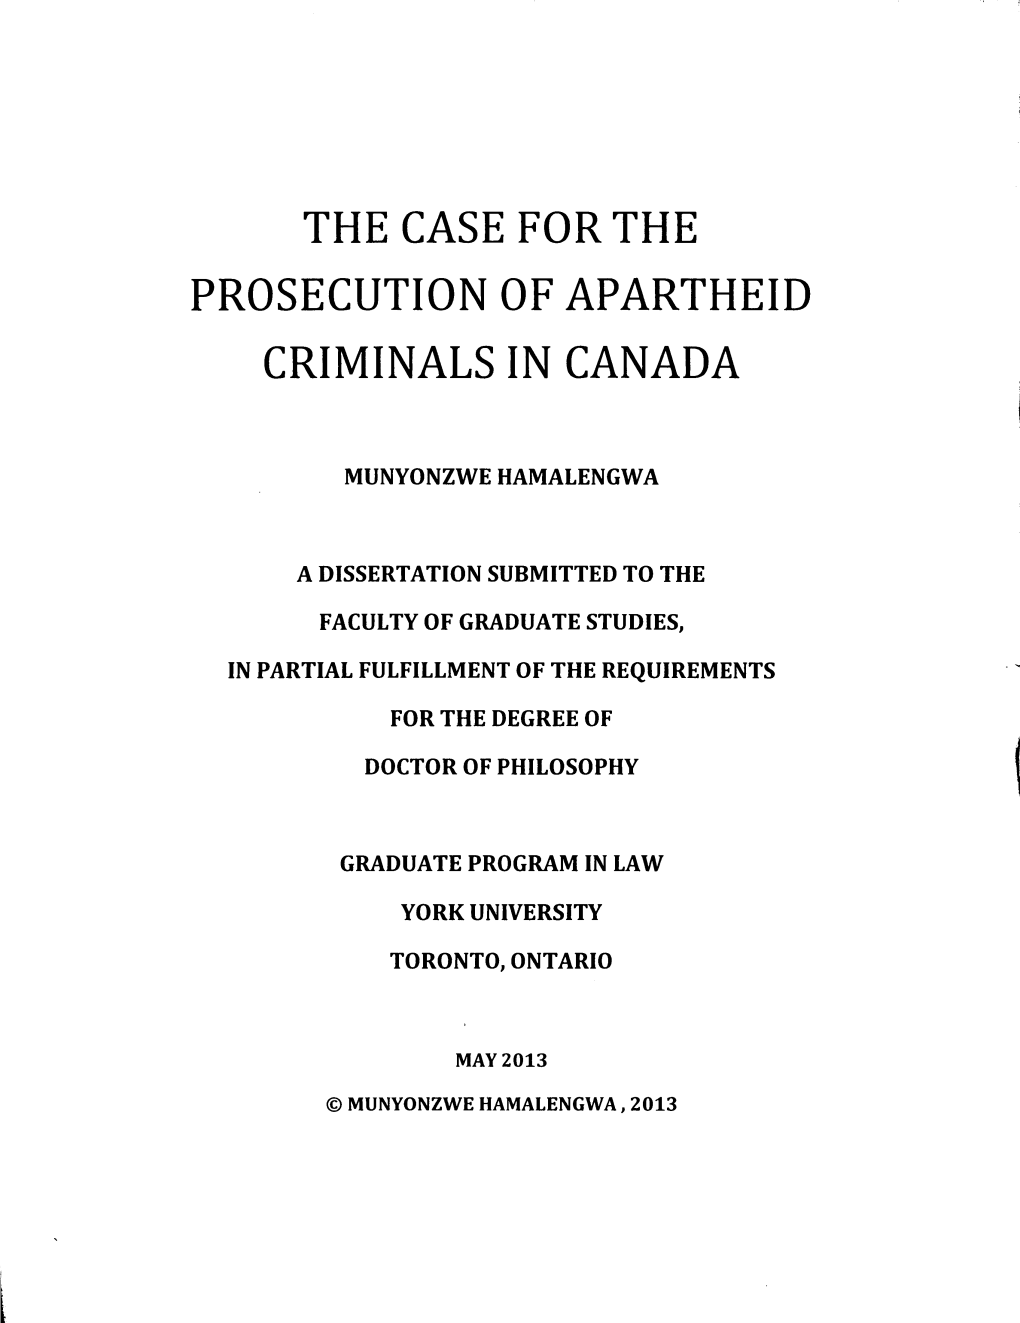 The Case for the Prosecution of Apartheid Criminals in Canada